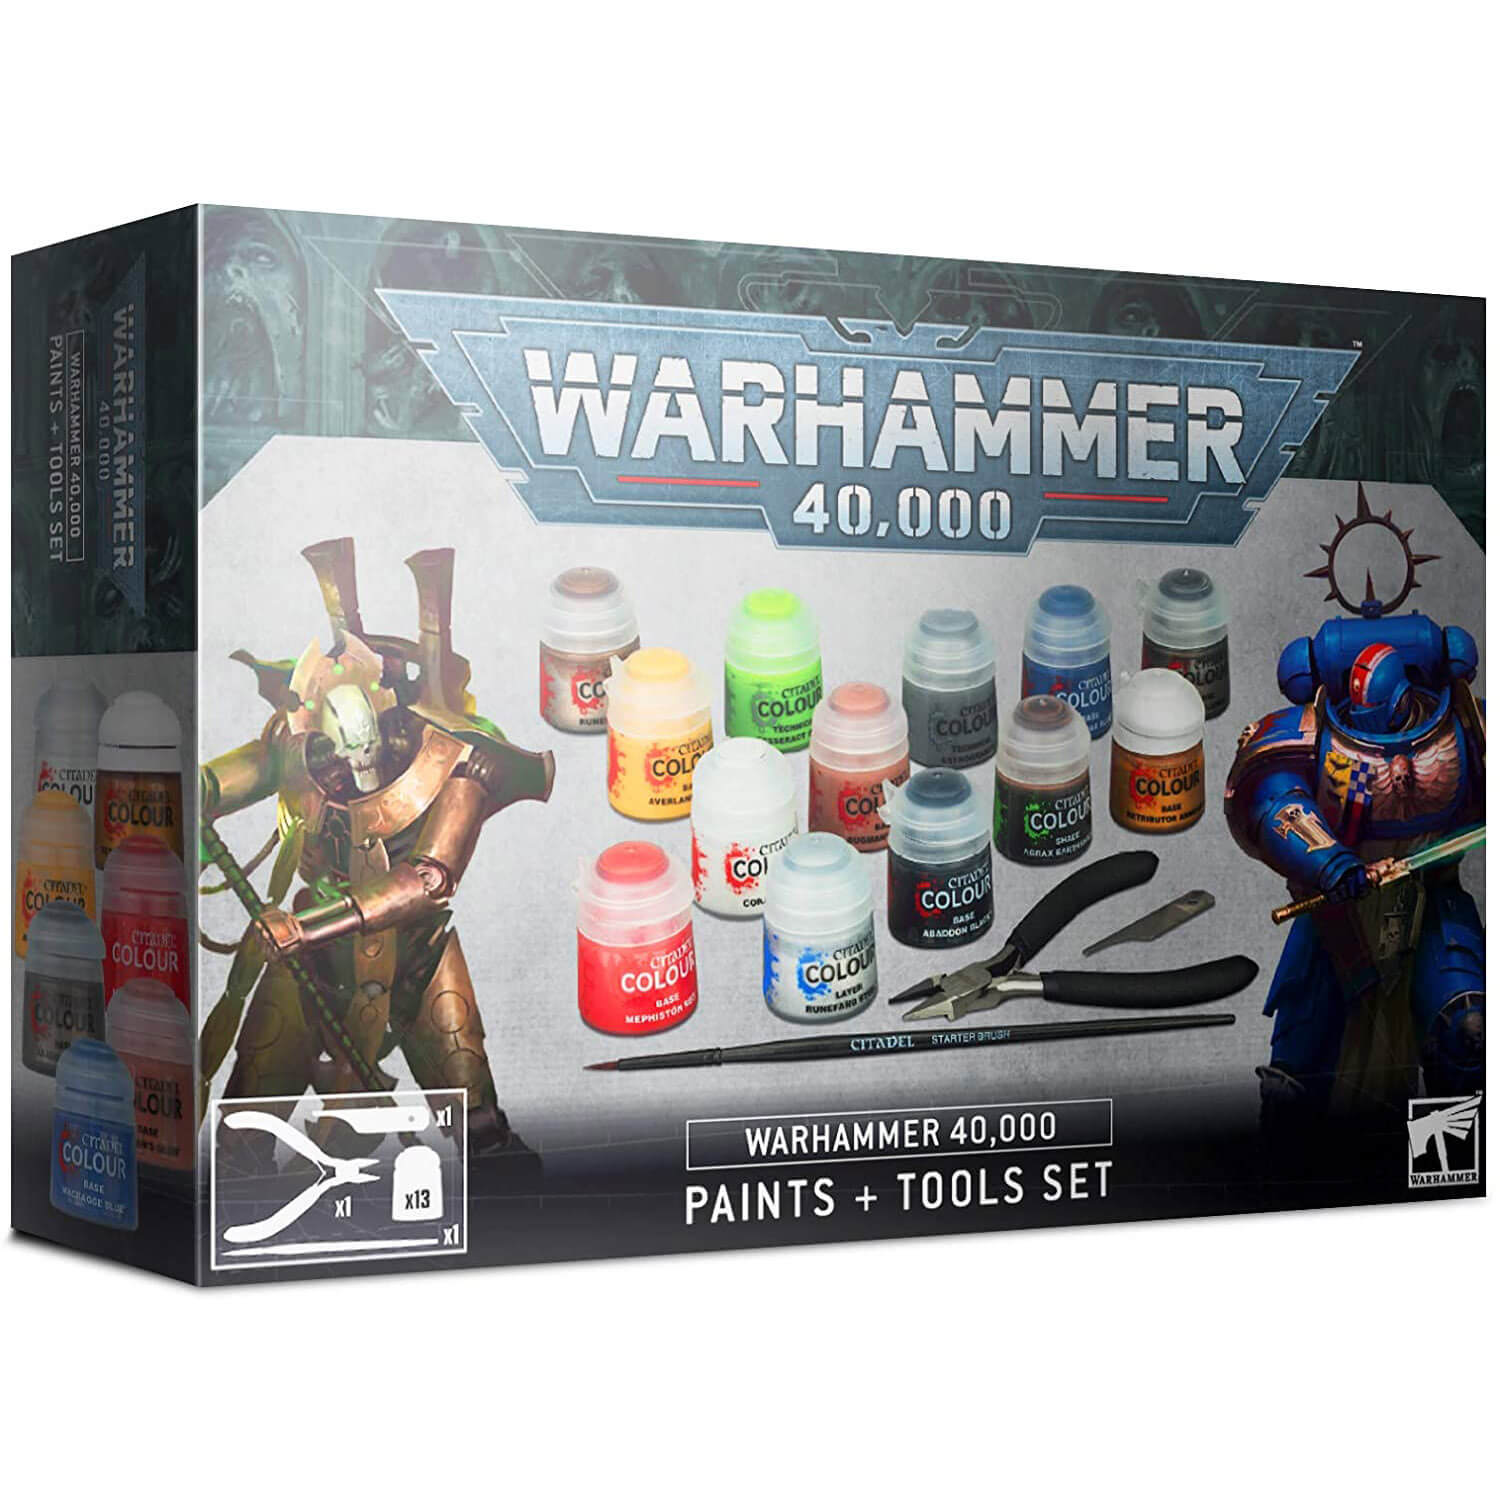 Warhammer 40k Paints and Tools Set (Ultramarines vs Necrons)